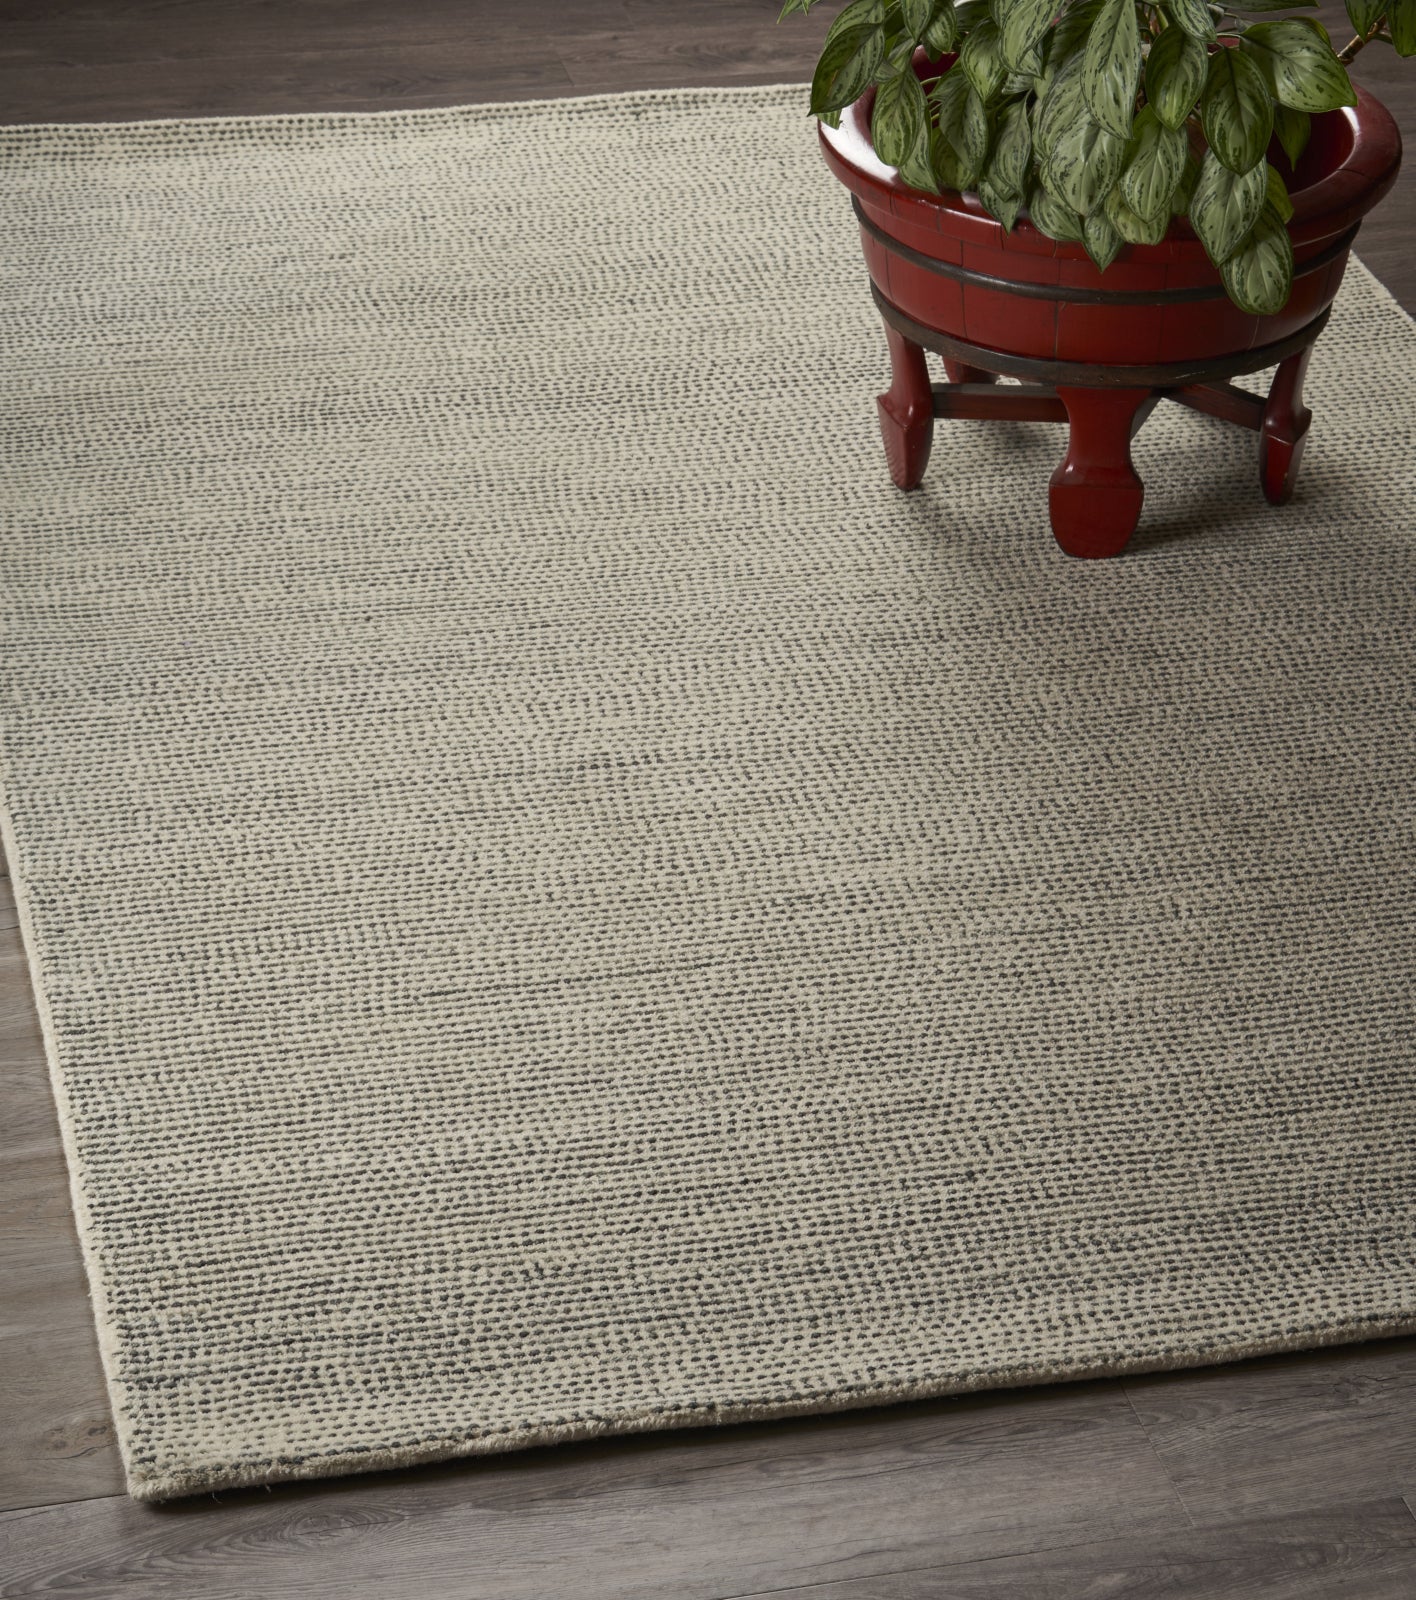 Pin on Area Rugs